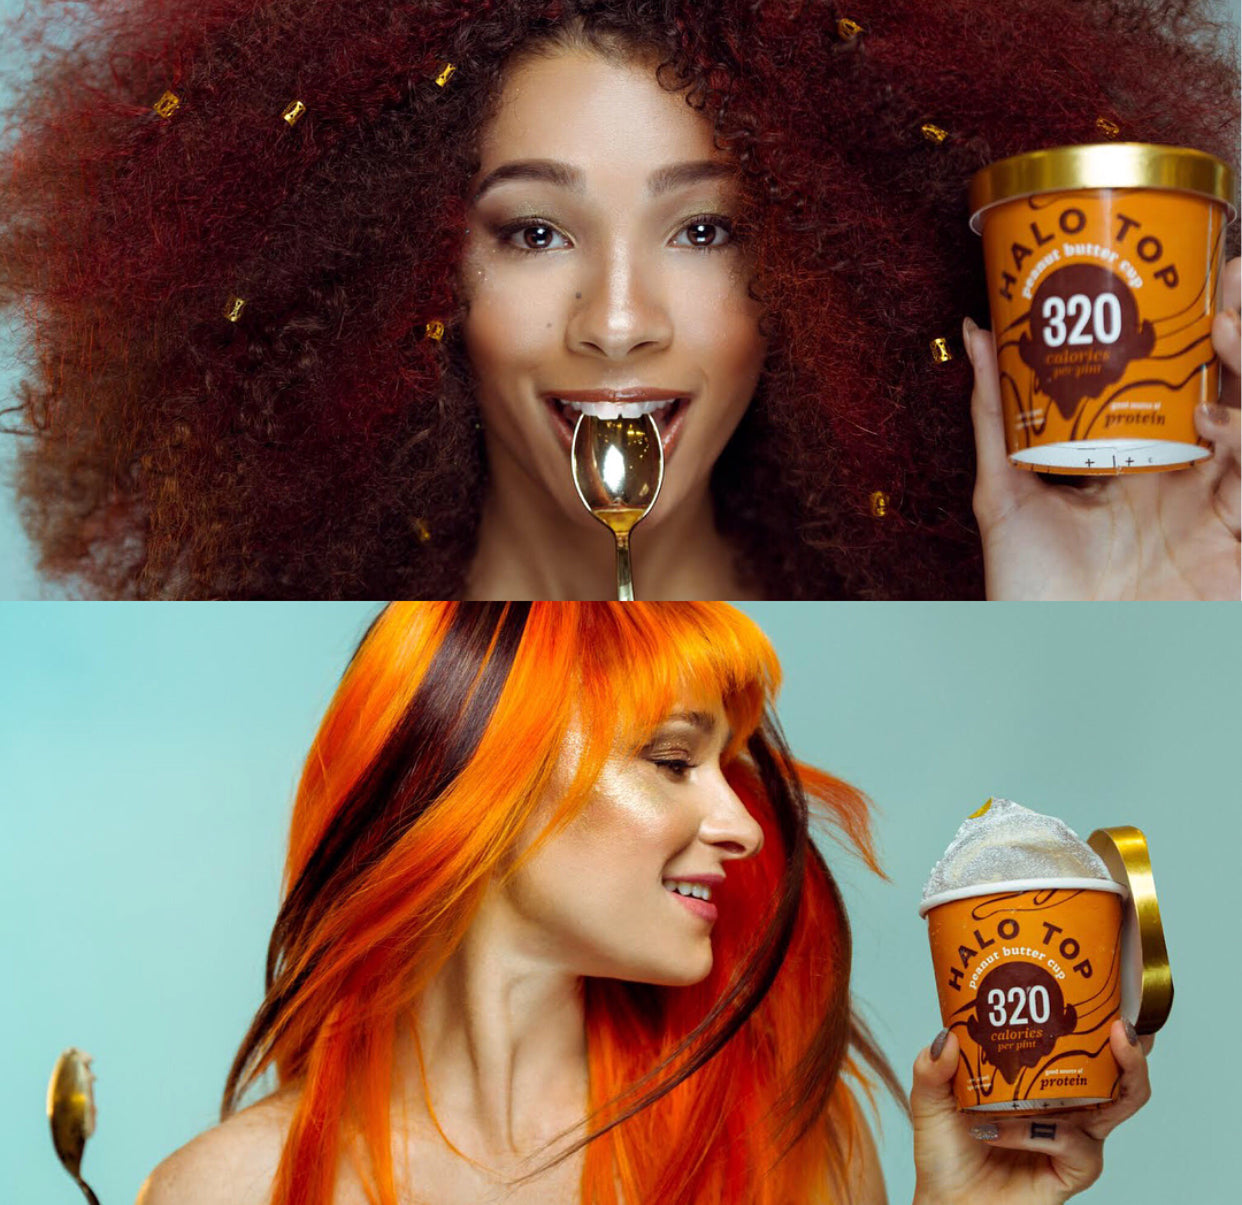 Halo Top Ice Cream Gives Us a 2018 Hot Hair Trend!